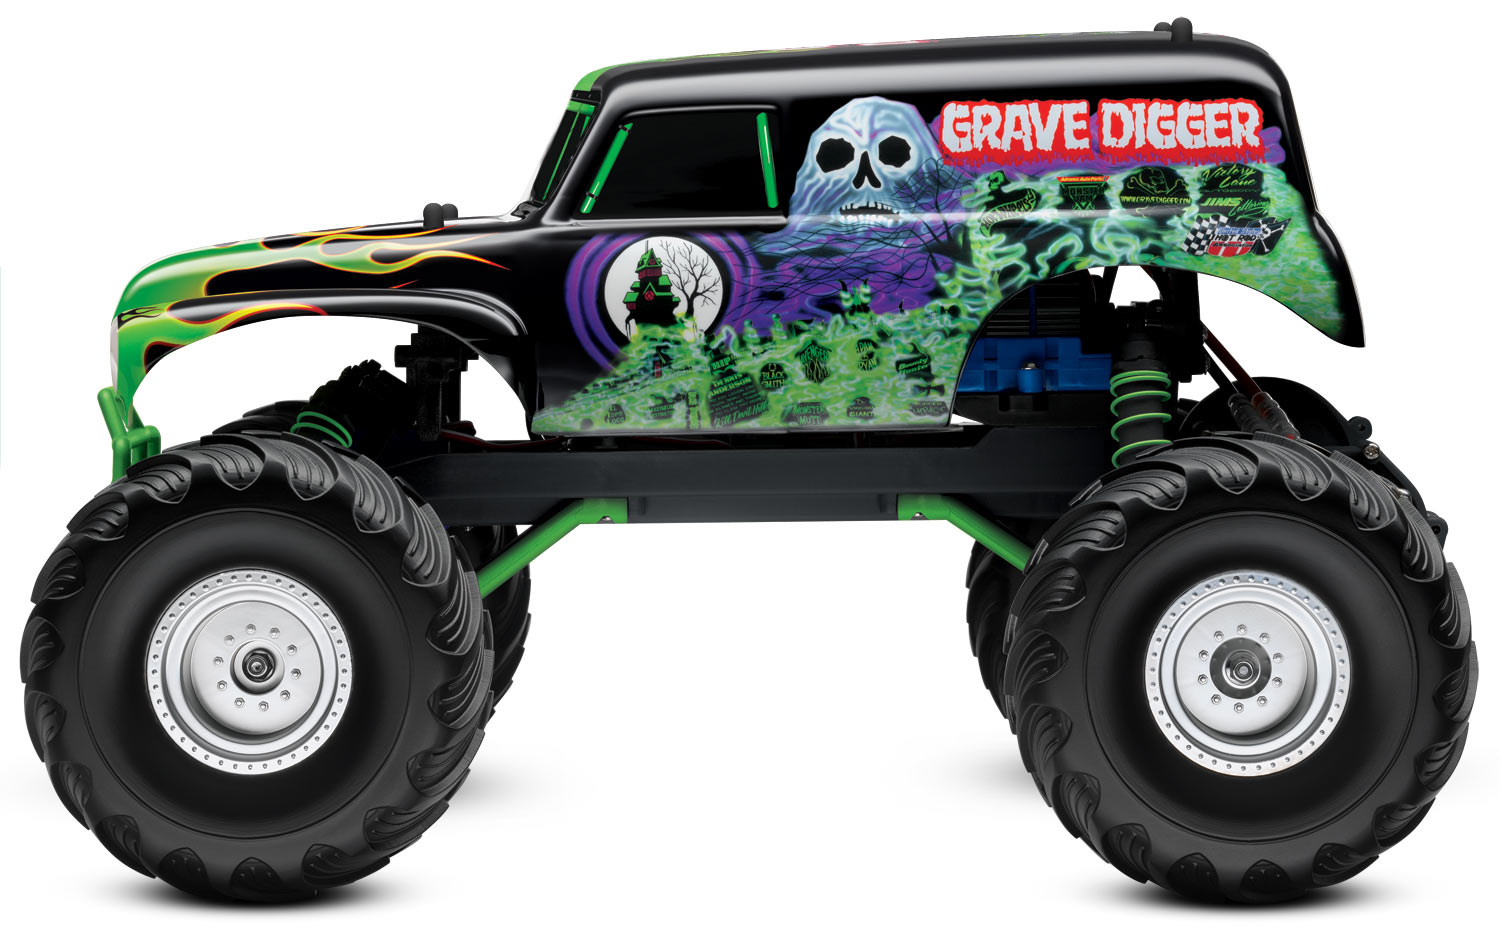 Traxxas Grave Digger Stampede Monster Truck Rcca Radio Control Rc